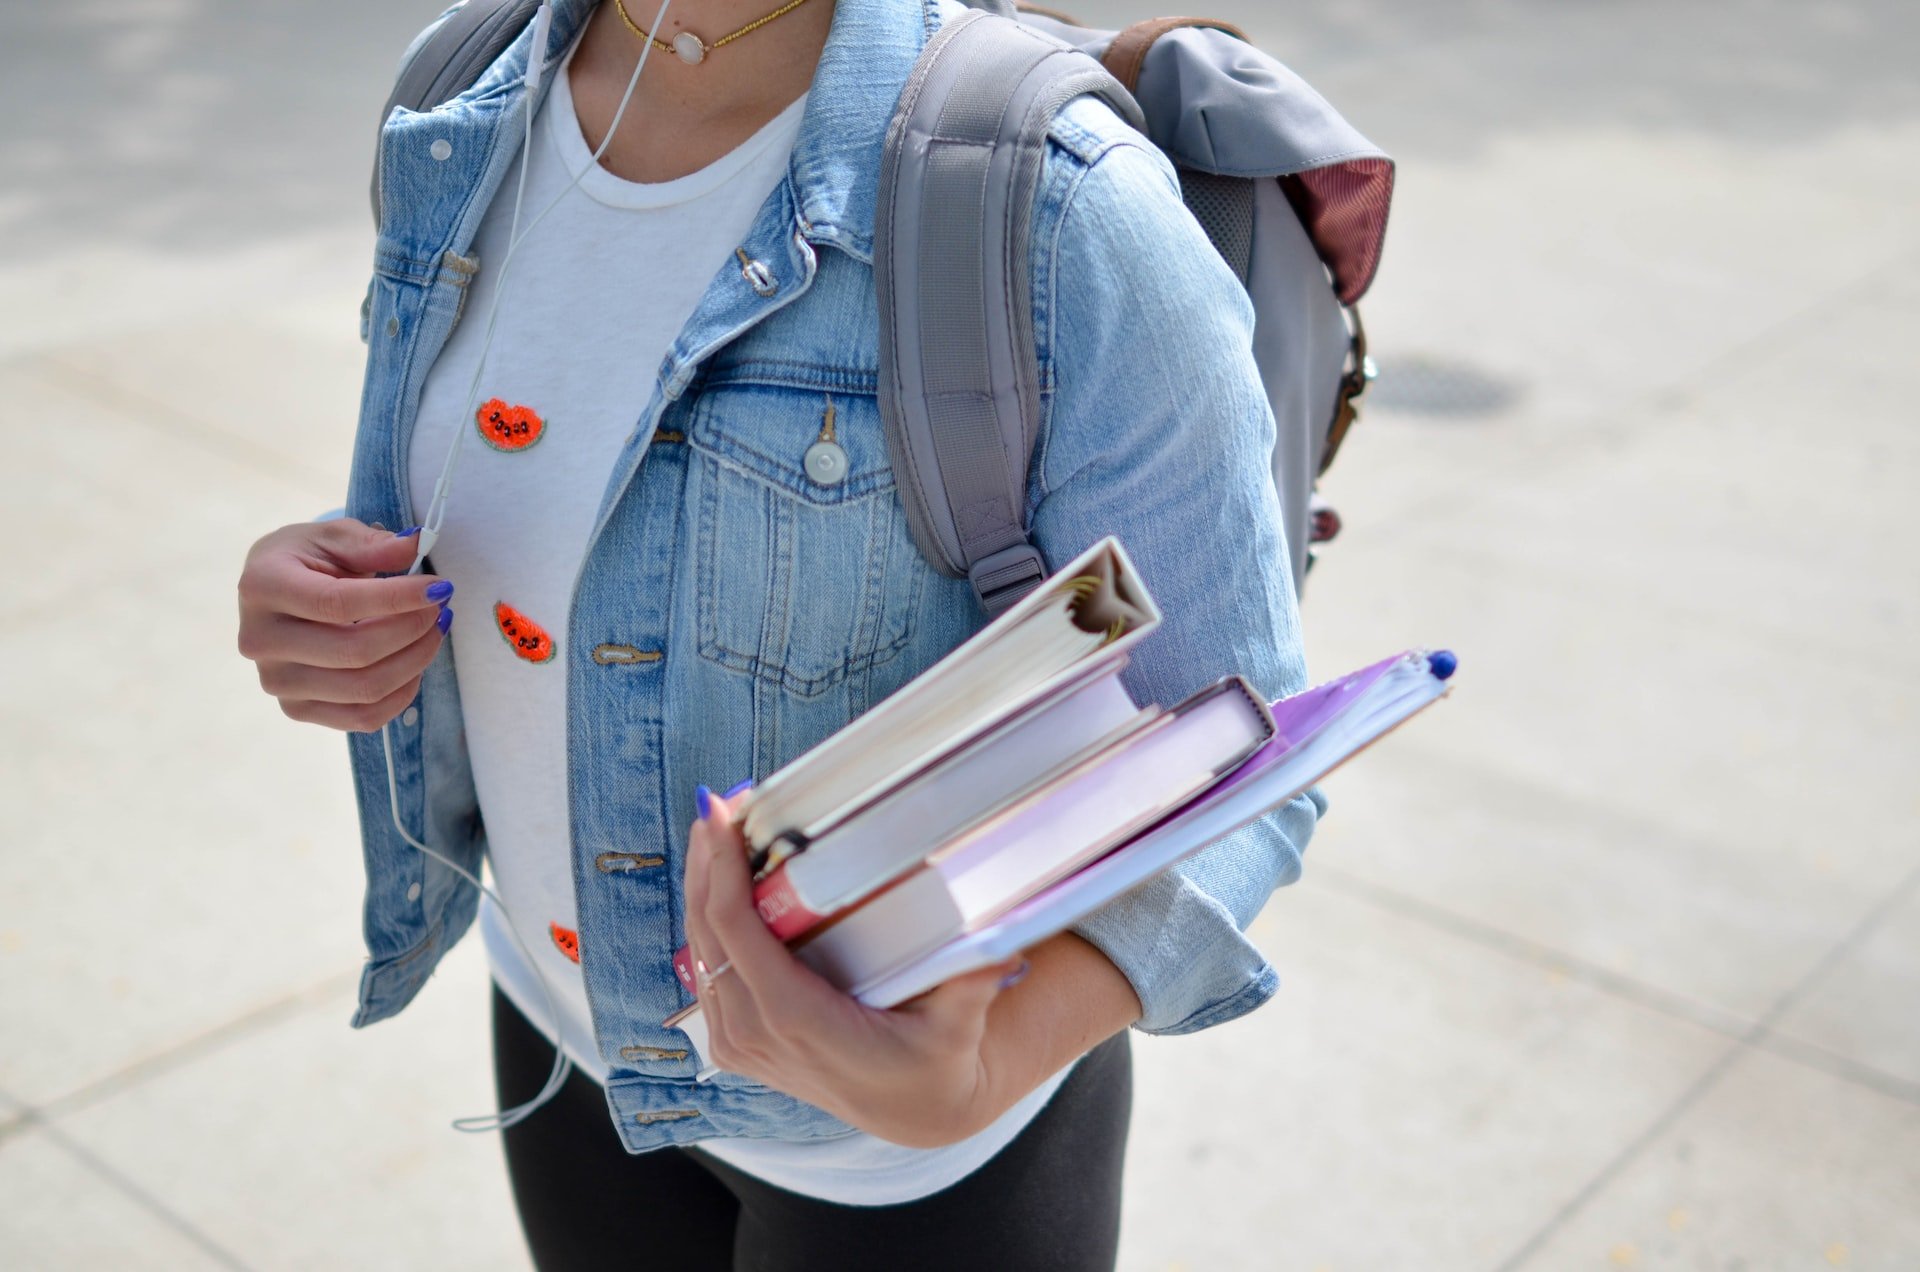 A student carrying textbooks and binders.